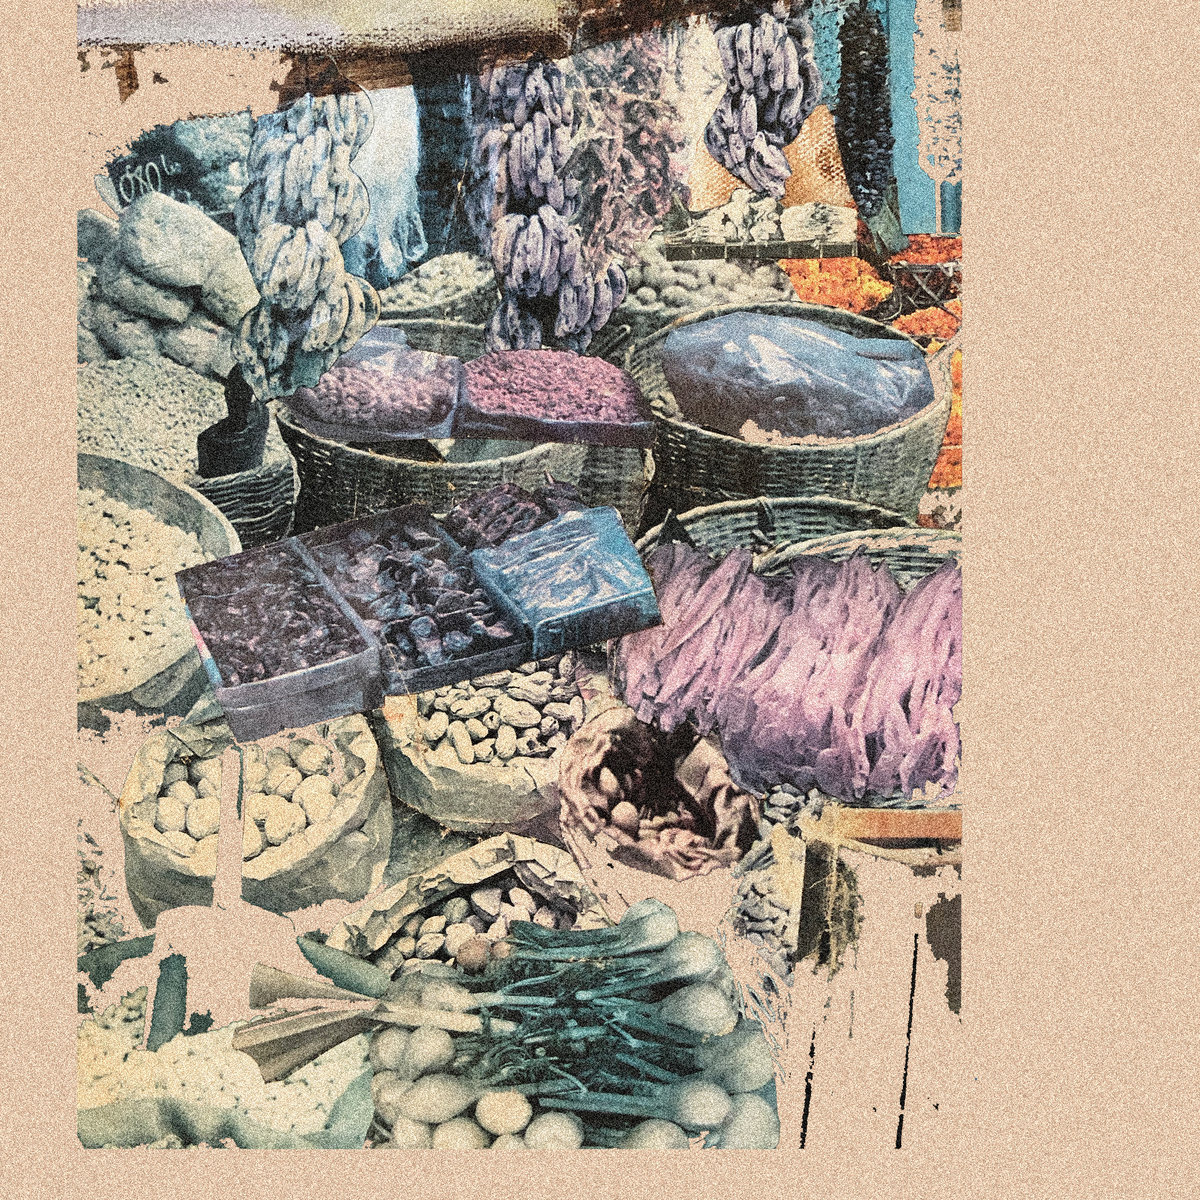 Joyer Sun Into Flies album art, washed out photograph of a market stall